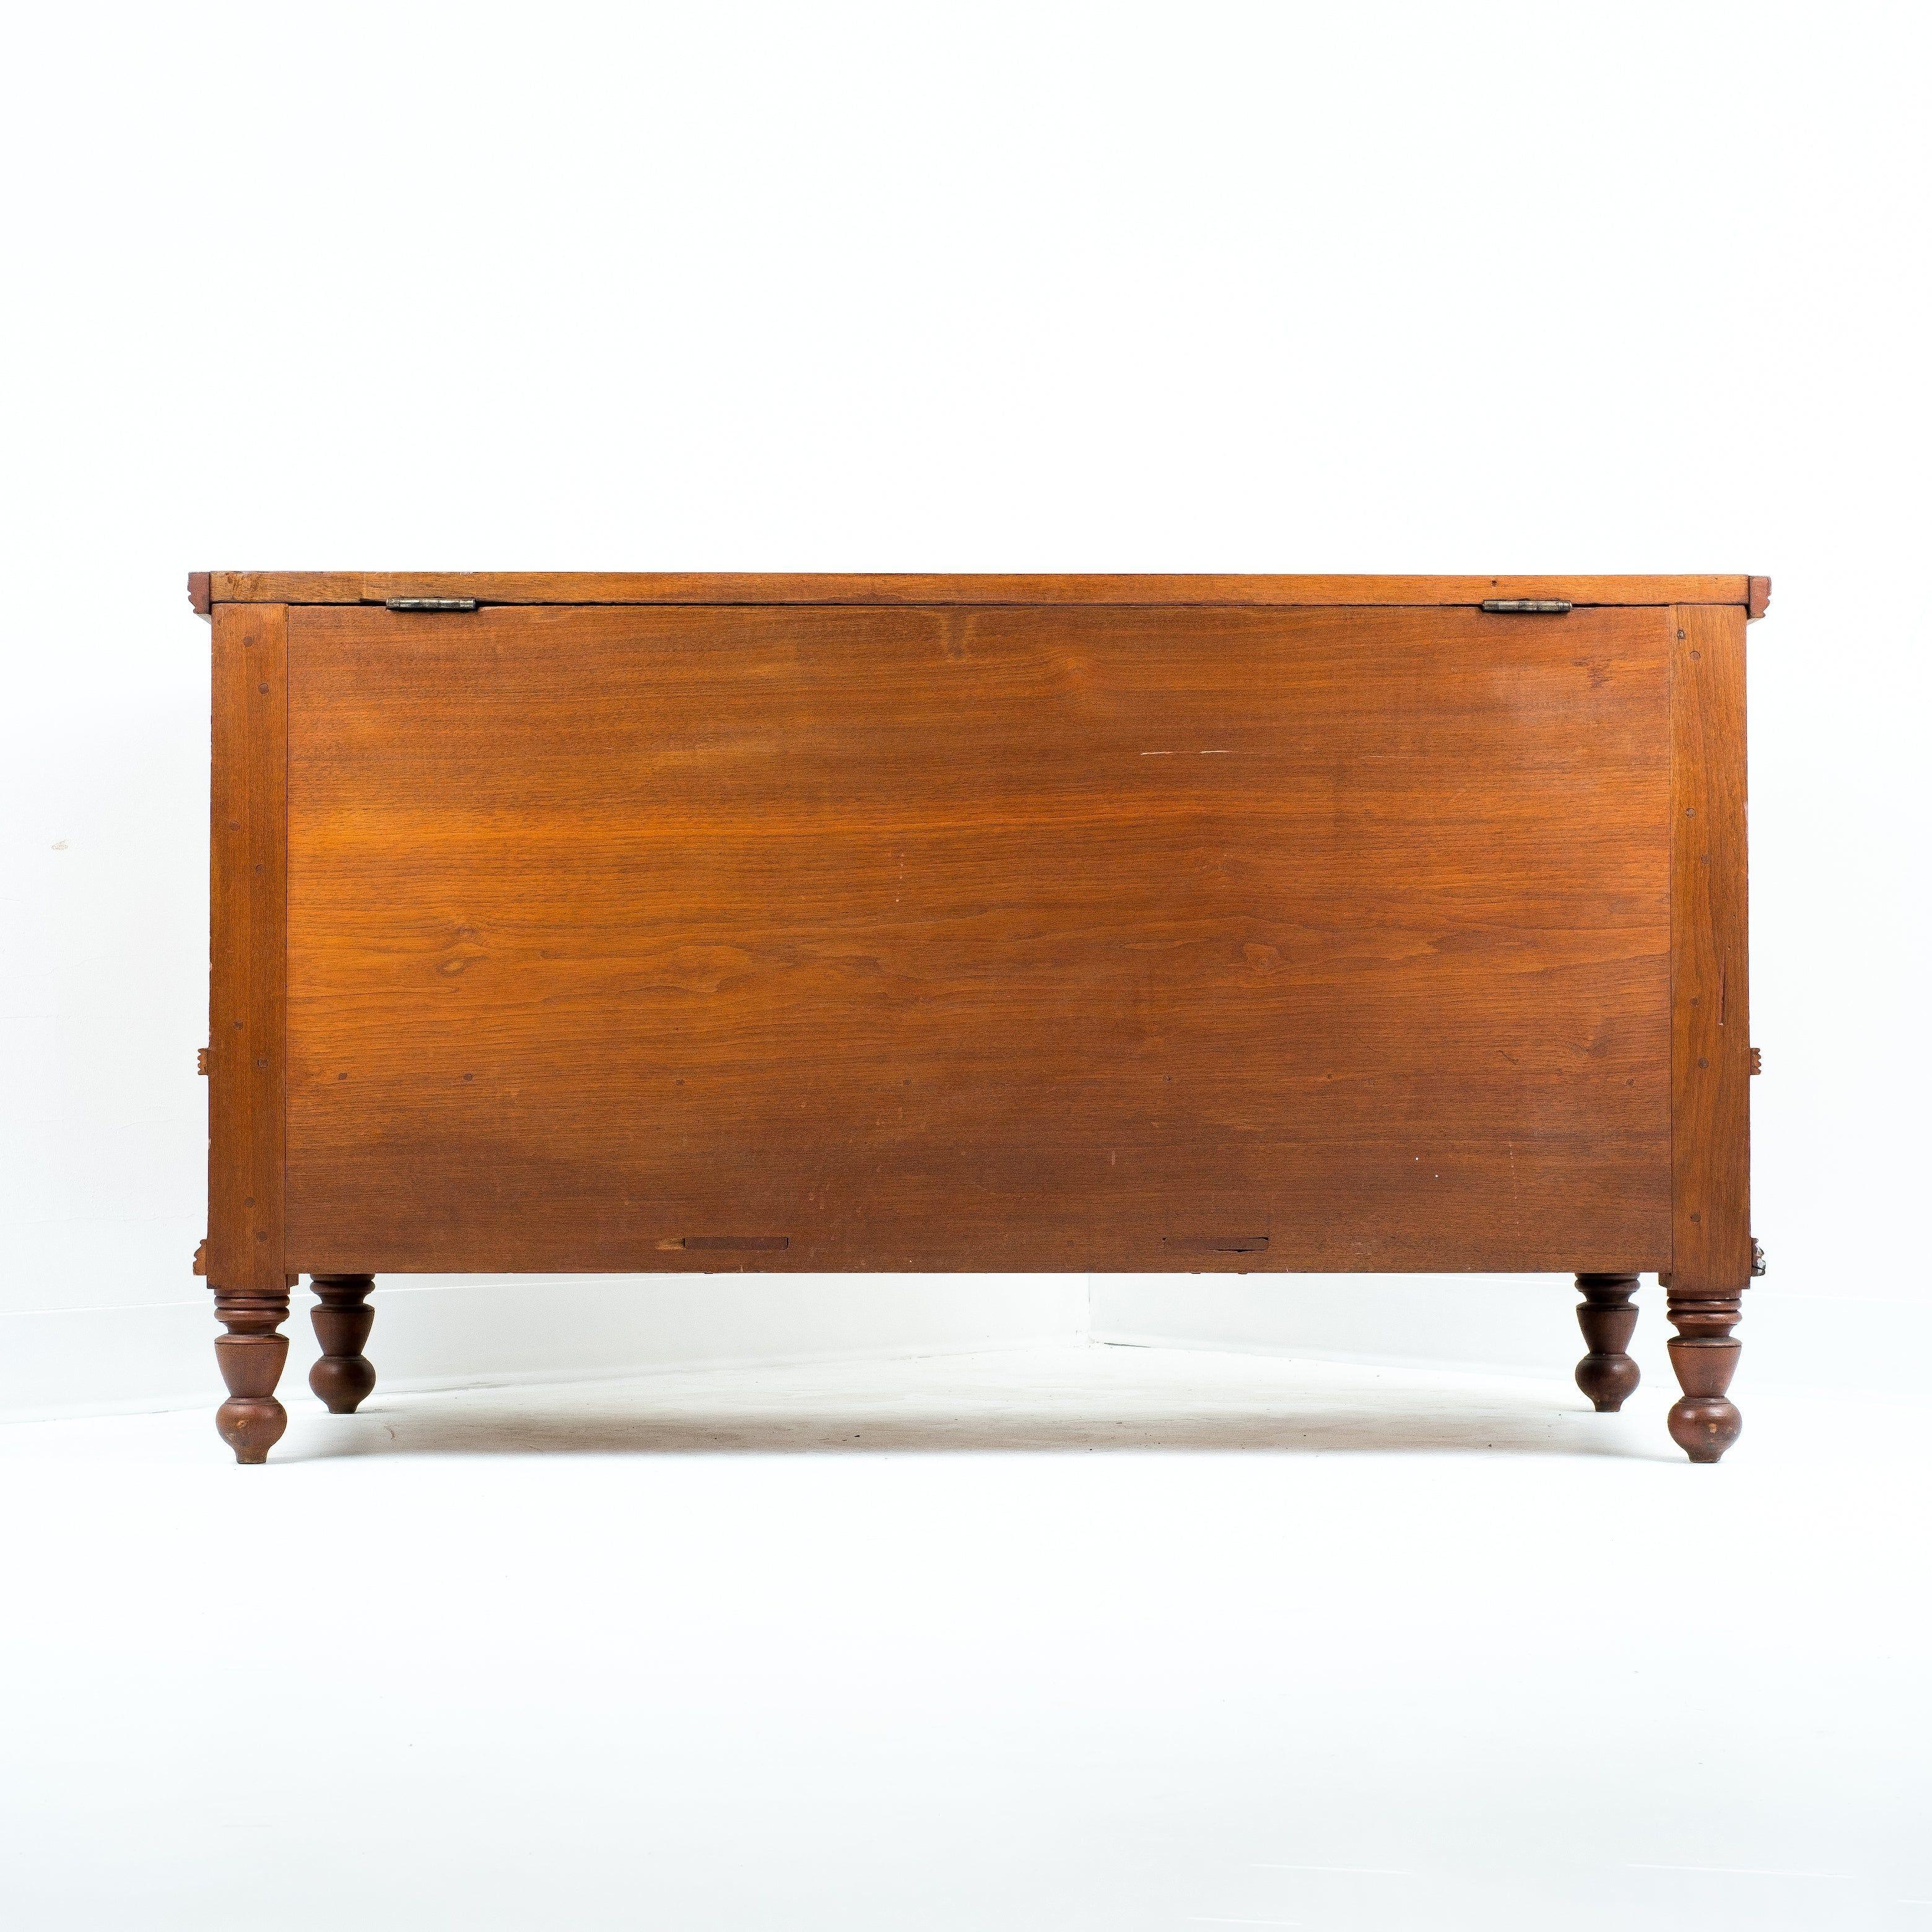 Iron Delaware Valley Black Walnut Dower Chest, 1830 For Sale